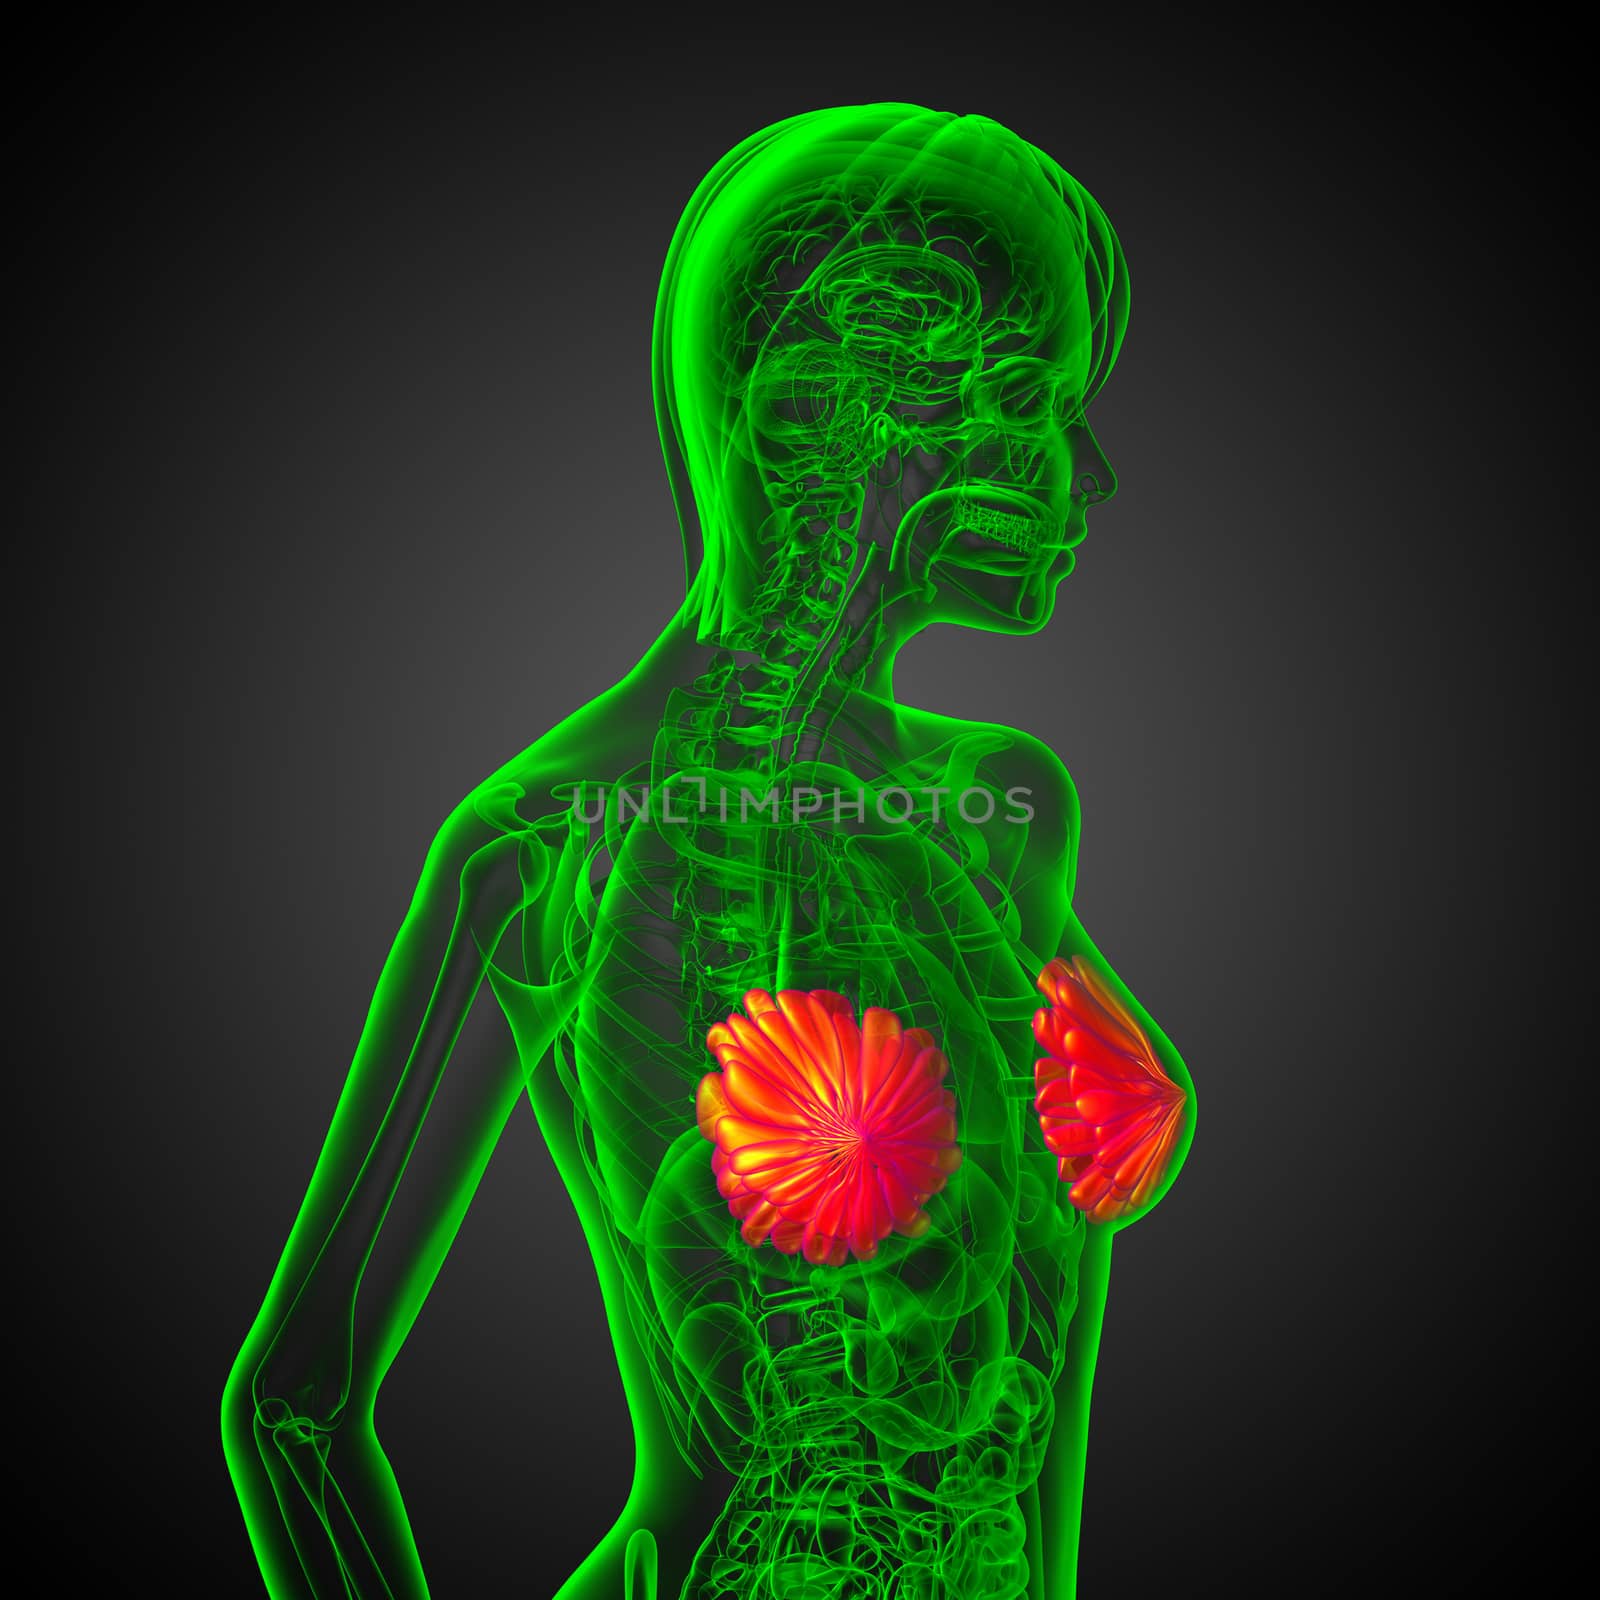 3d render medical illustration of the human breast  - side view